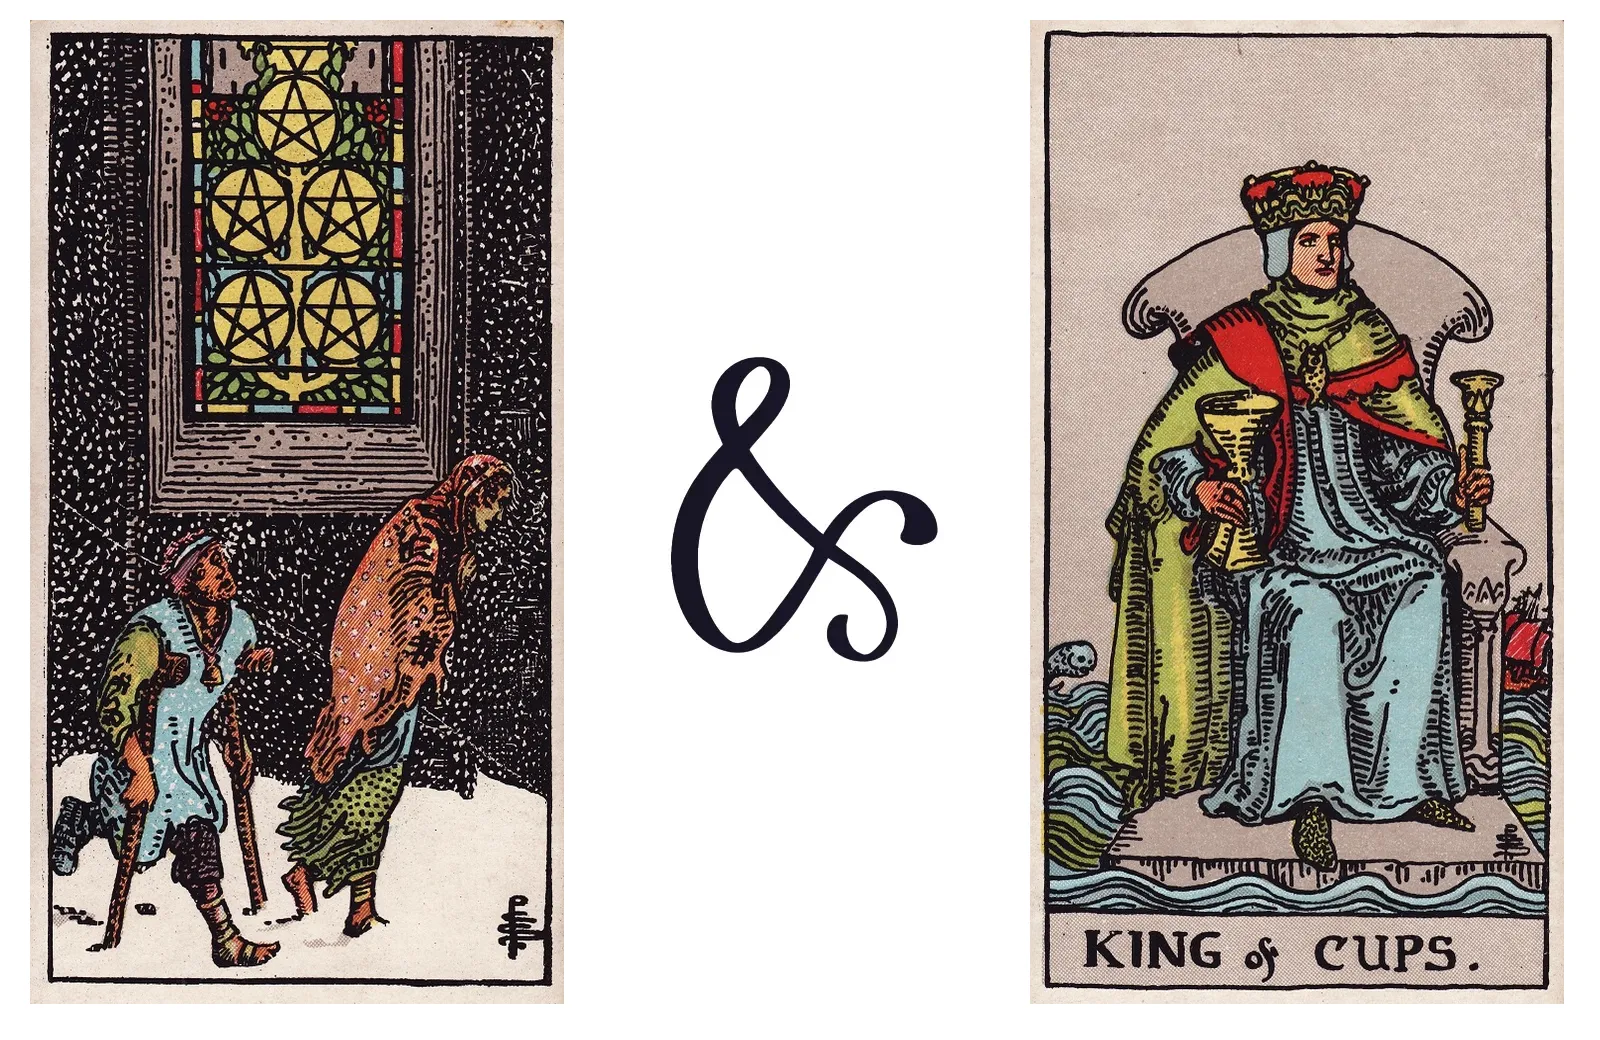 Five of Pentacles and King of Cups